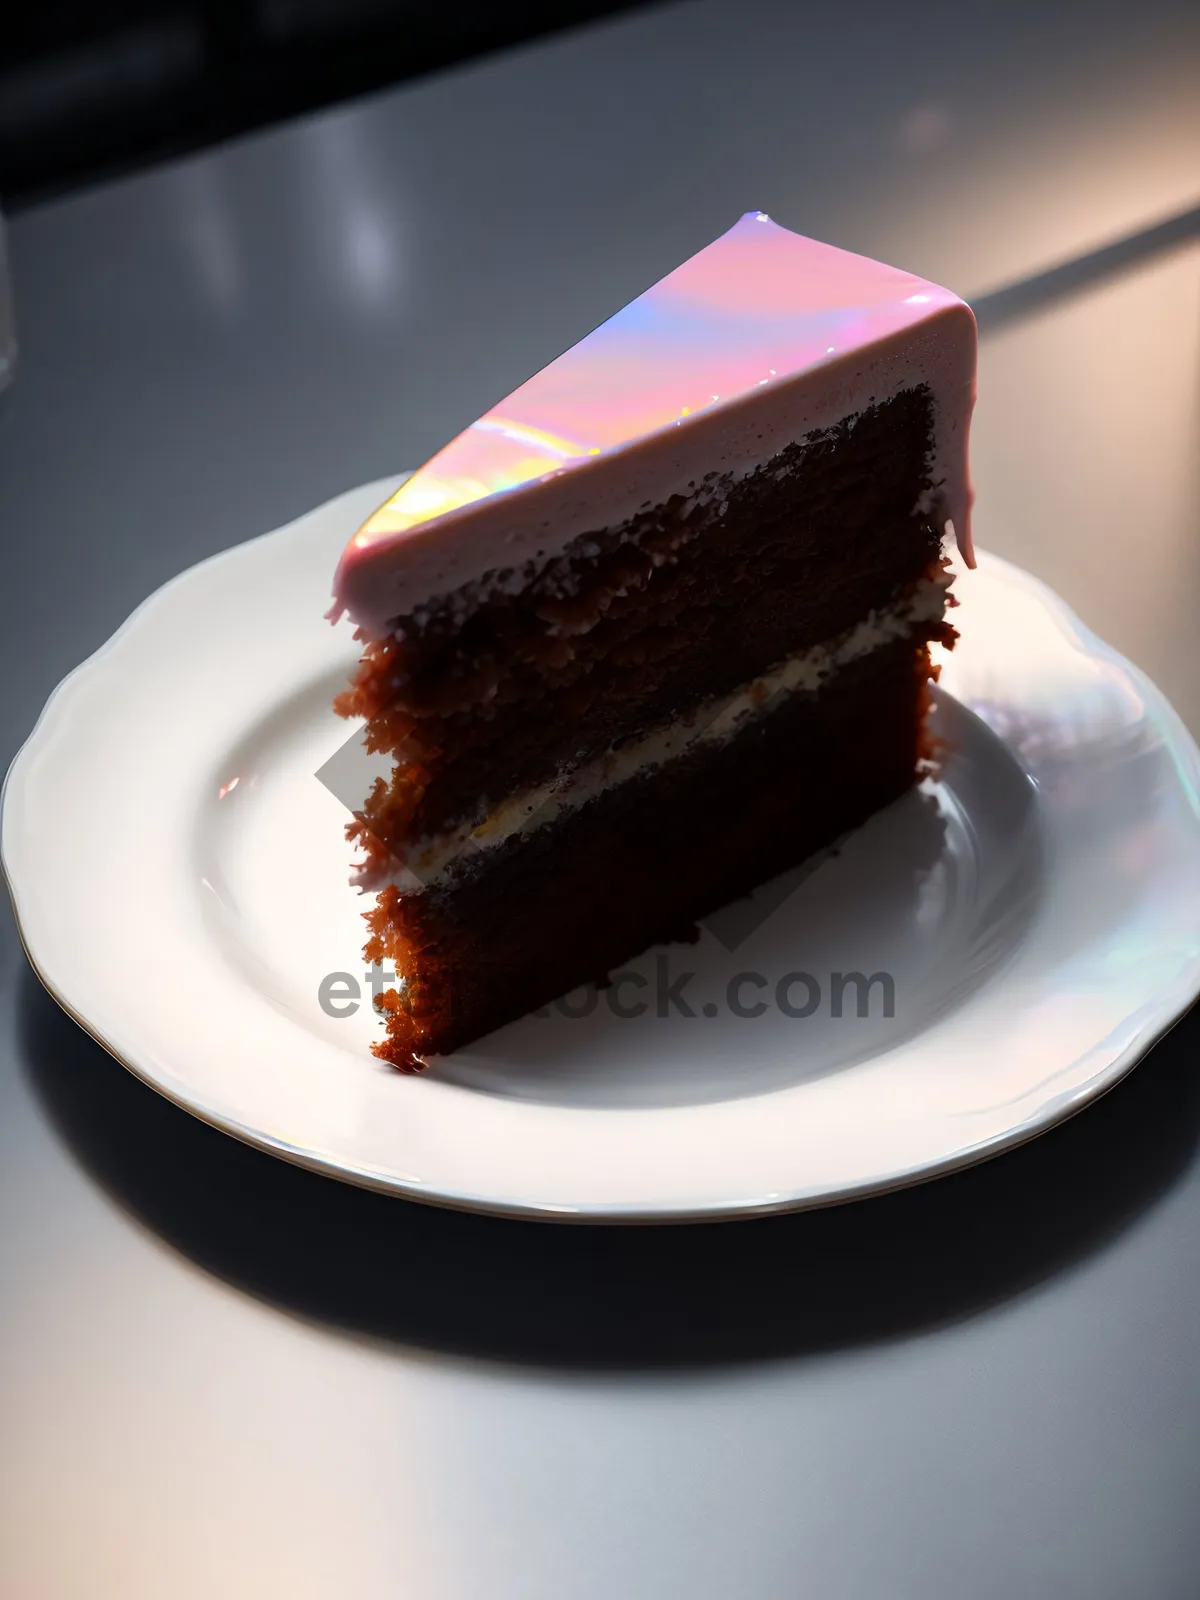 Picture of Delicious Gourmet Chocolate Cake Slice with Chocolate Sauce